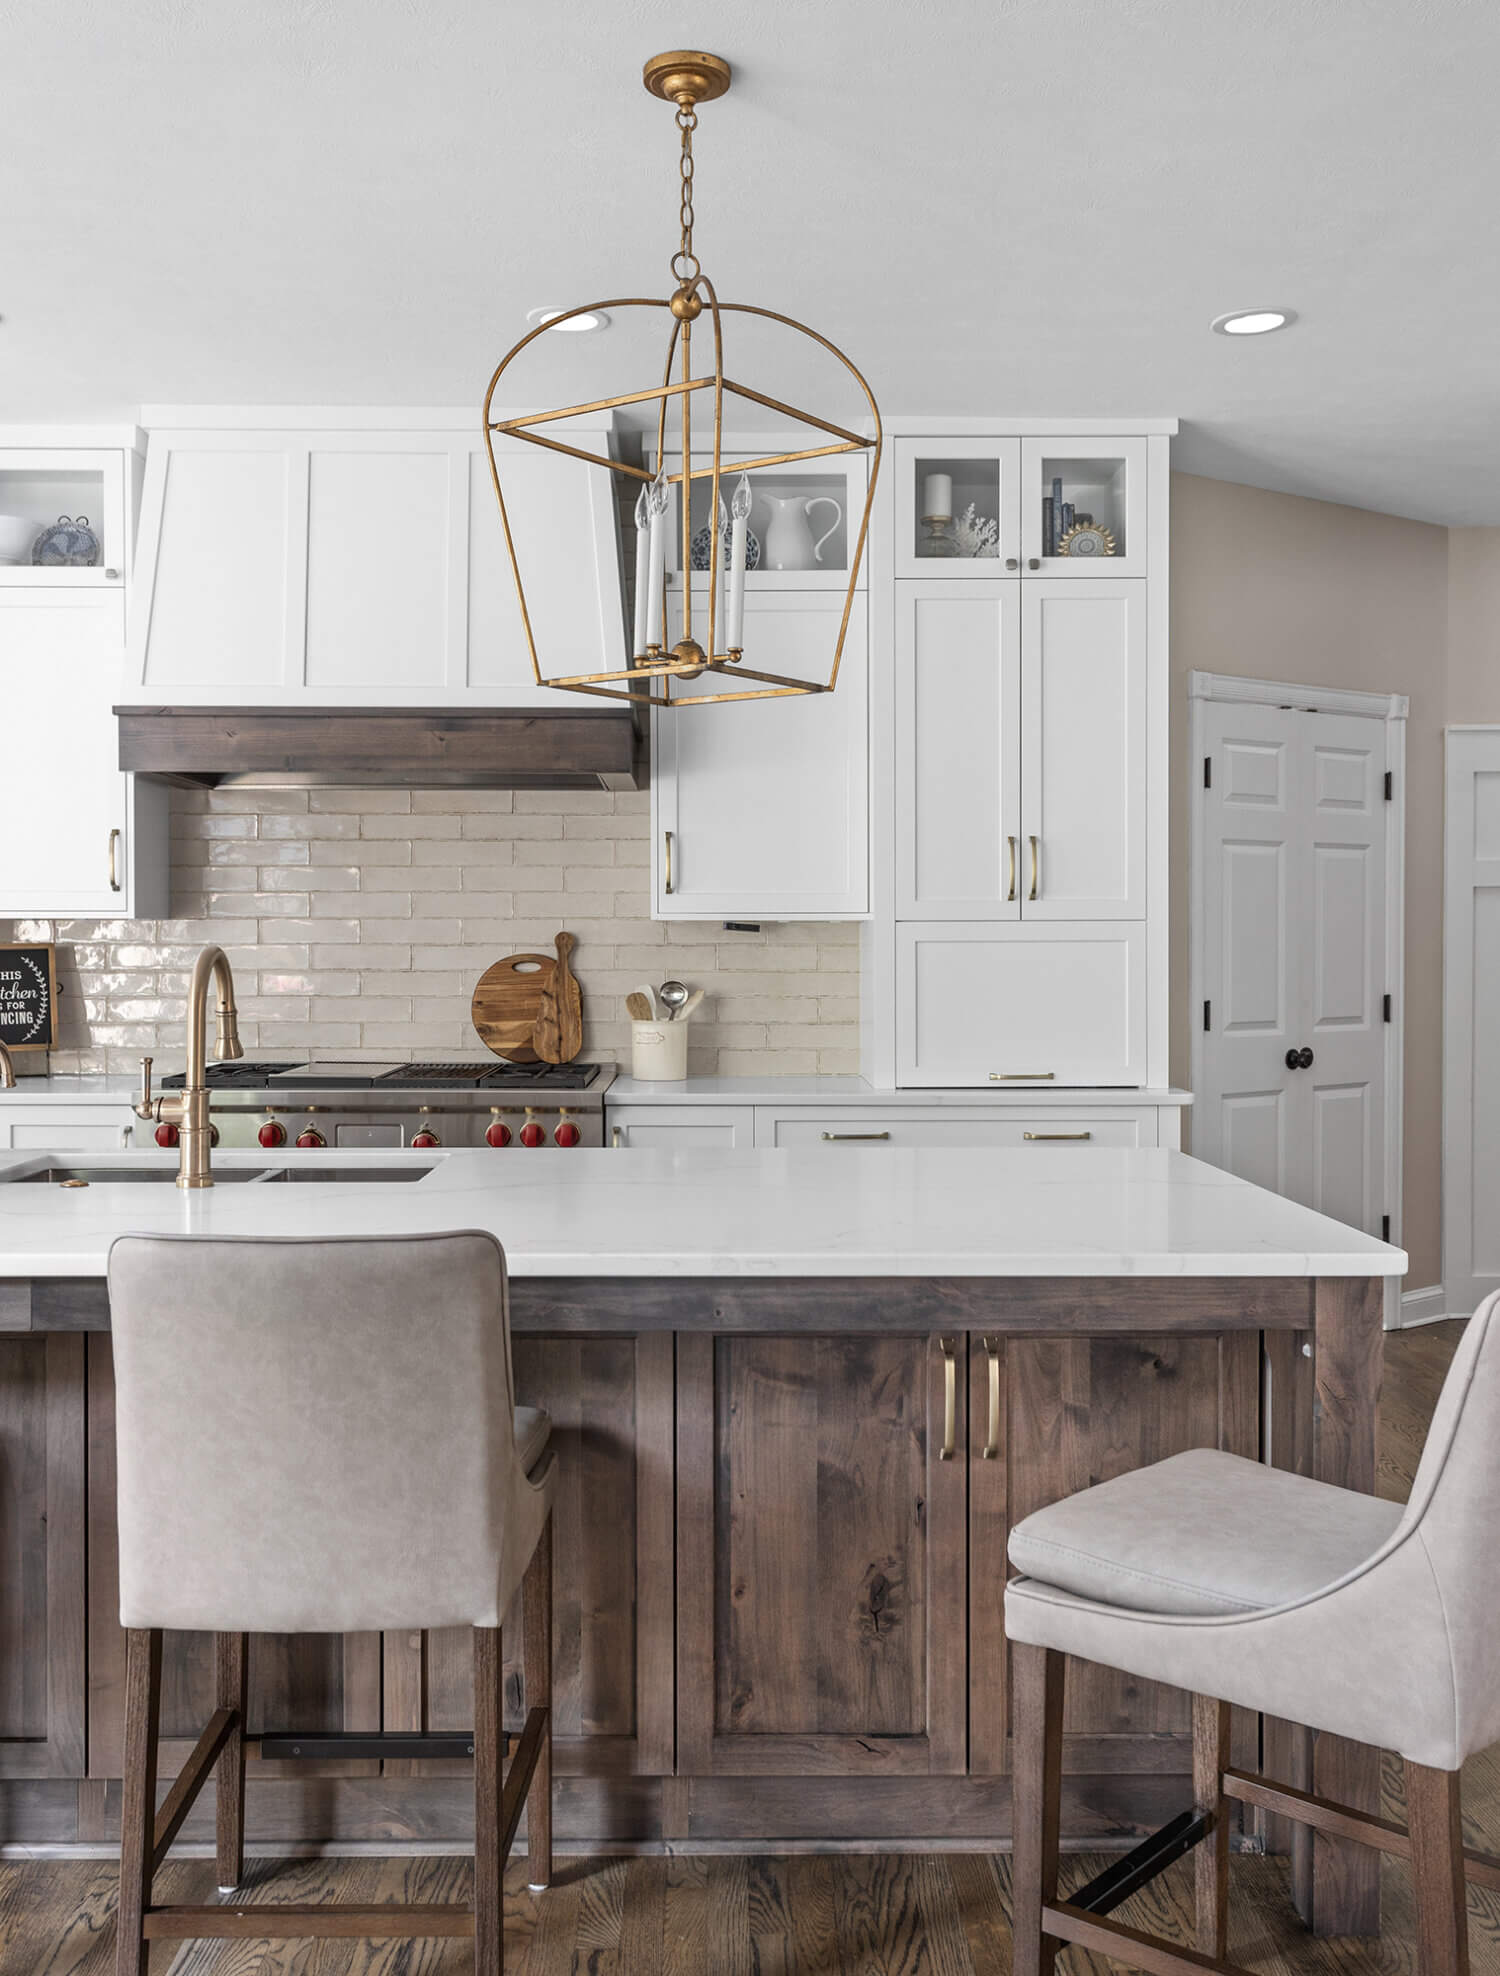 A beautiful transitional kitchen with shaker cabinet doors shown in a white paint and brown stained knotty alder wood.